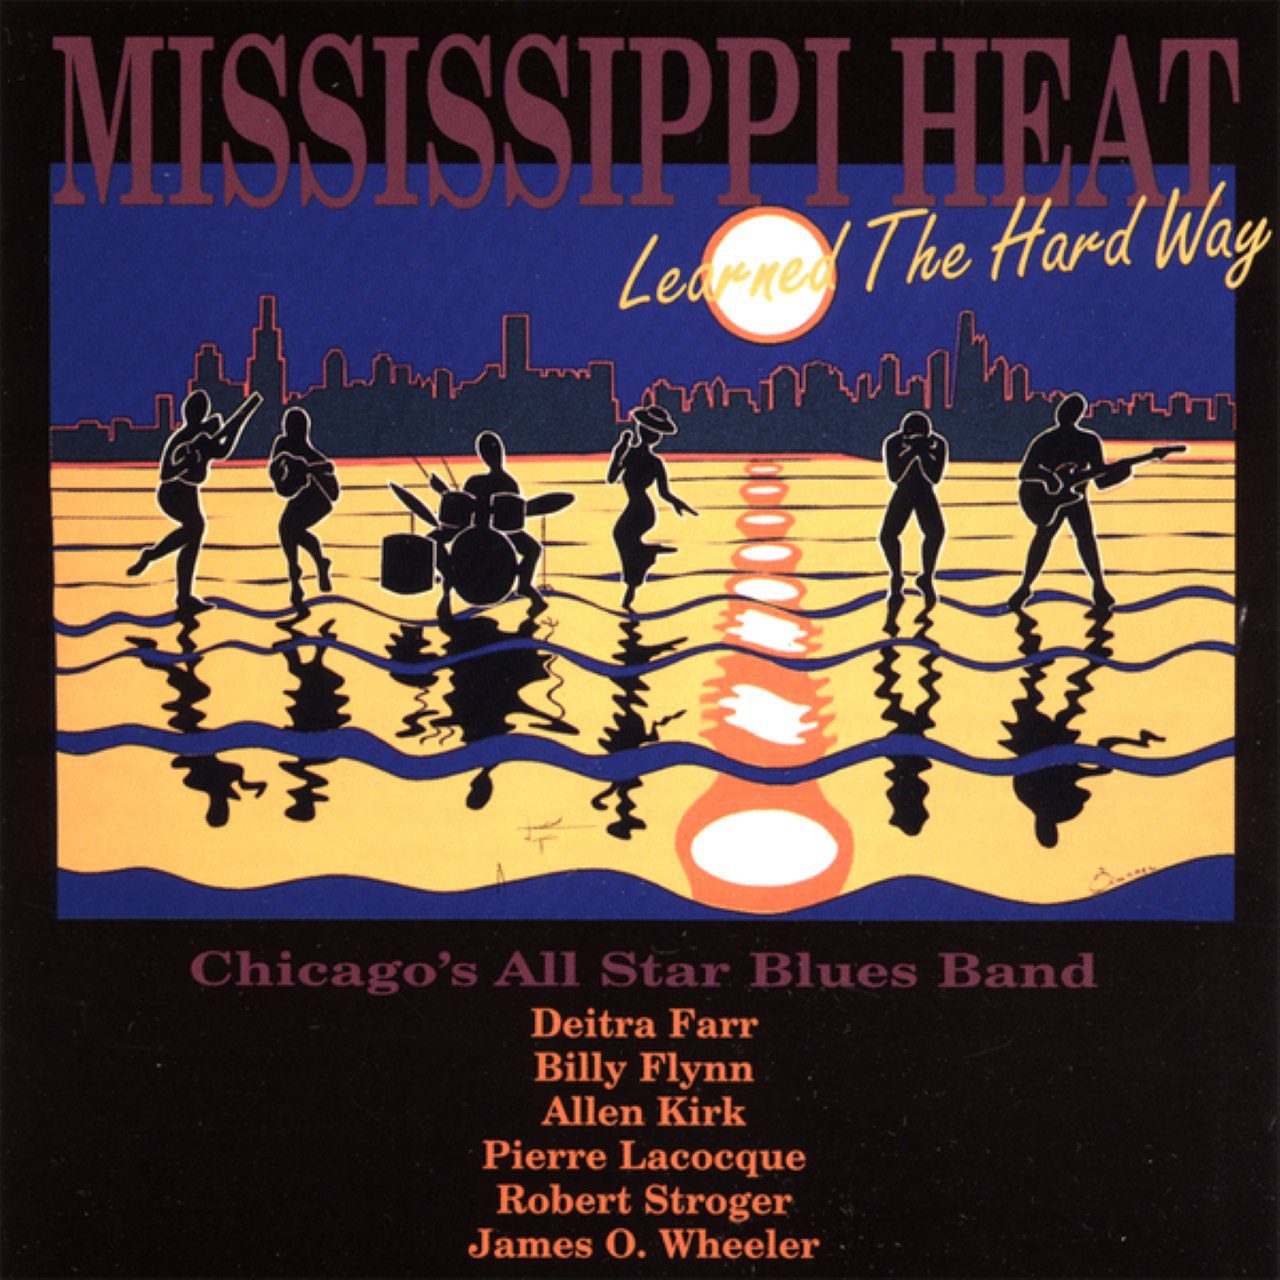 Mississippi Heat – Learned The Hard Way cover album